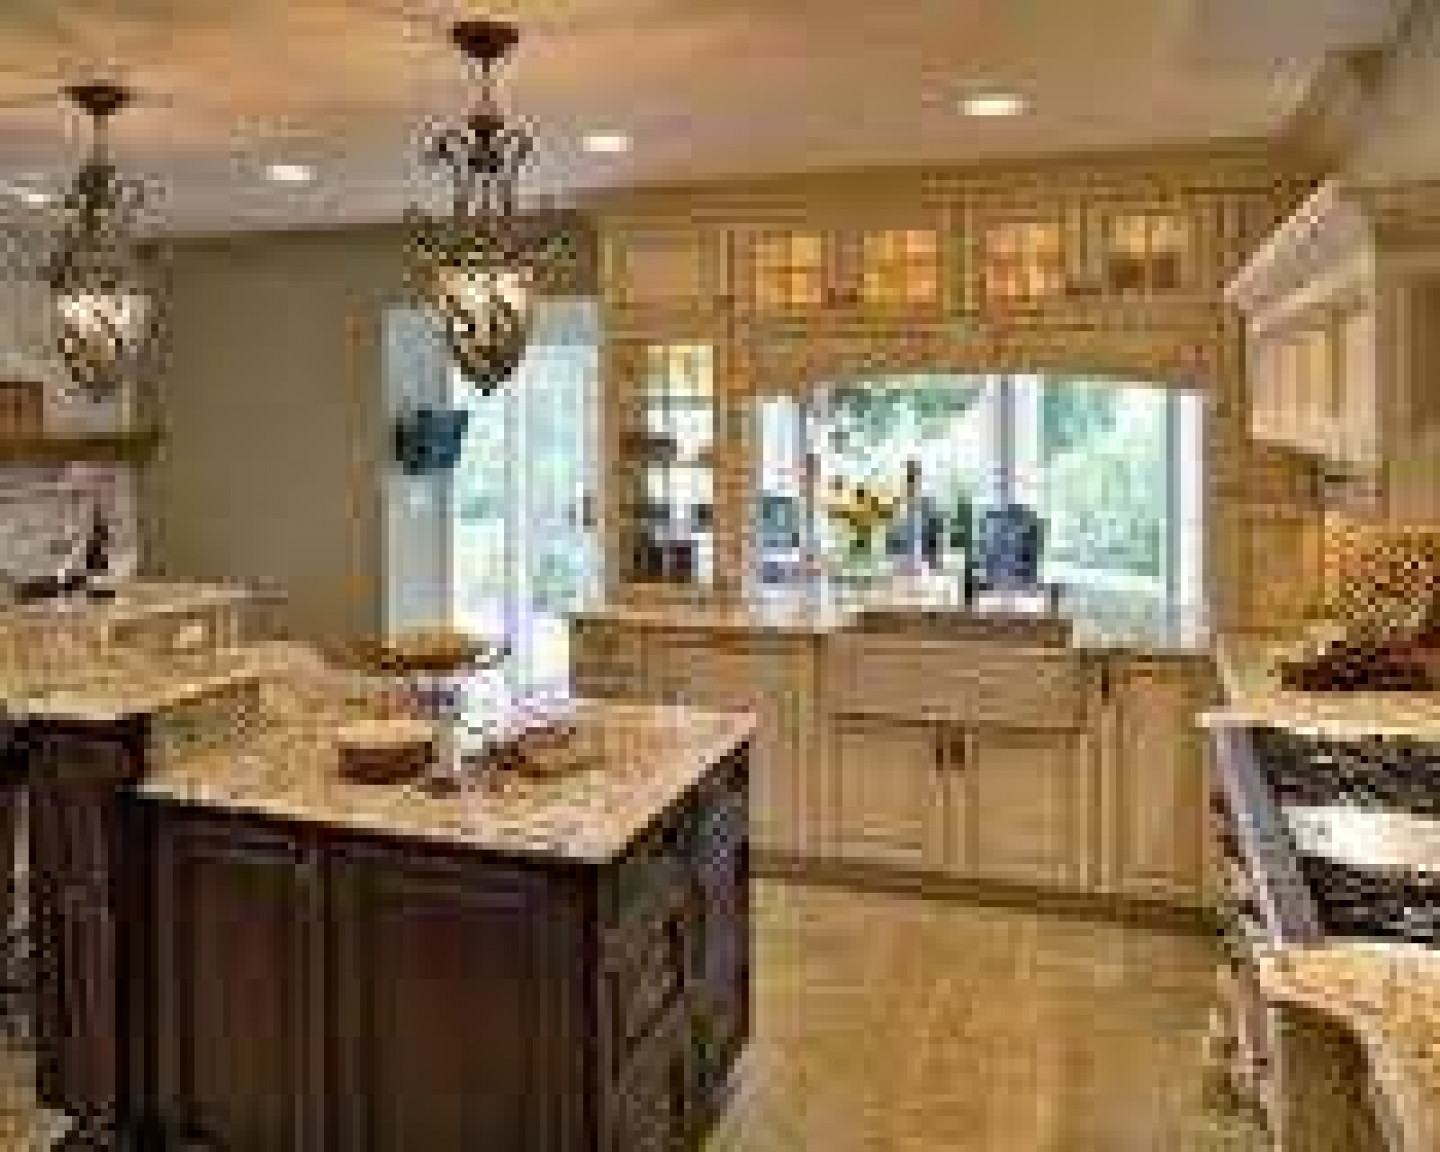 Tuscan Kitchen Curtains
 Tuscan Style Kitchen Curtains Where to Buy